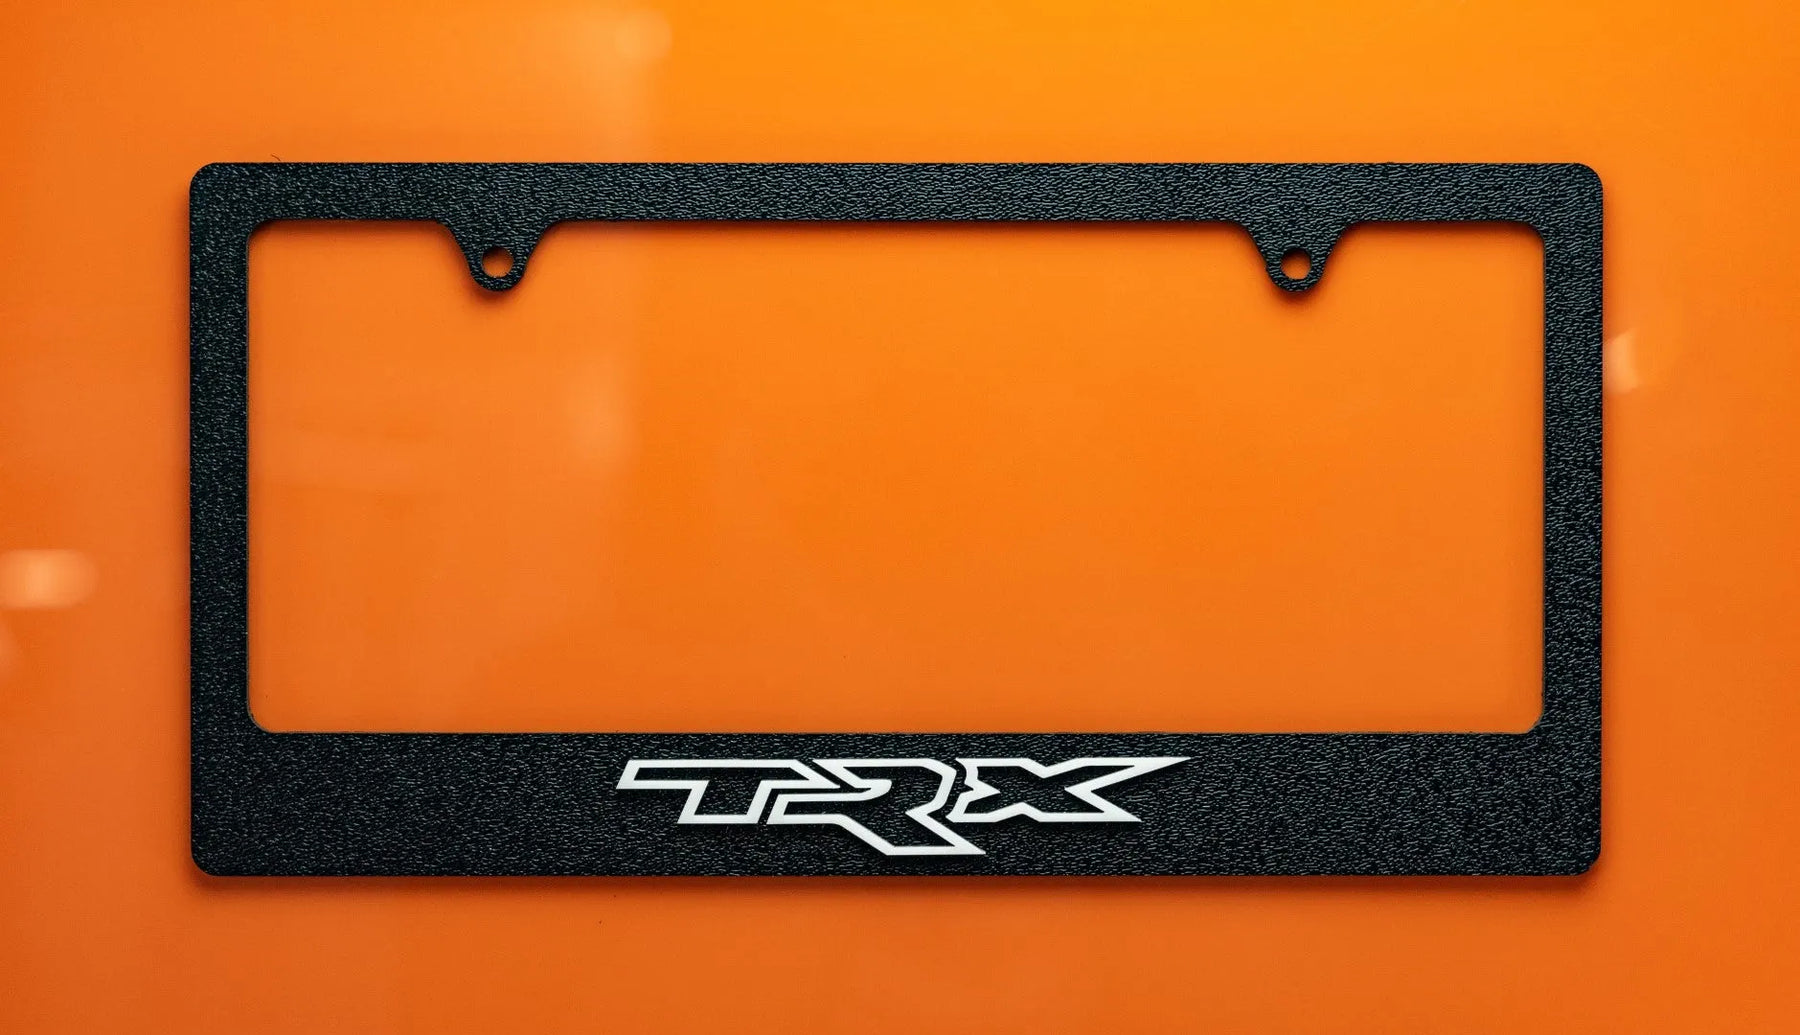 TRX® License Plate Border - Officially Licensed Product